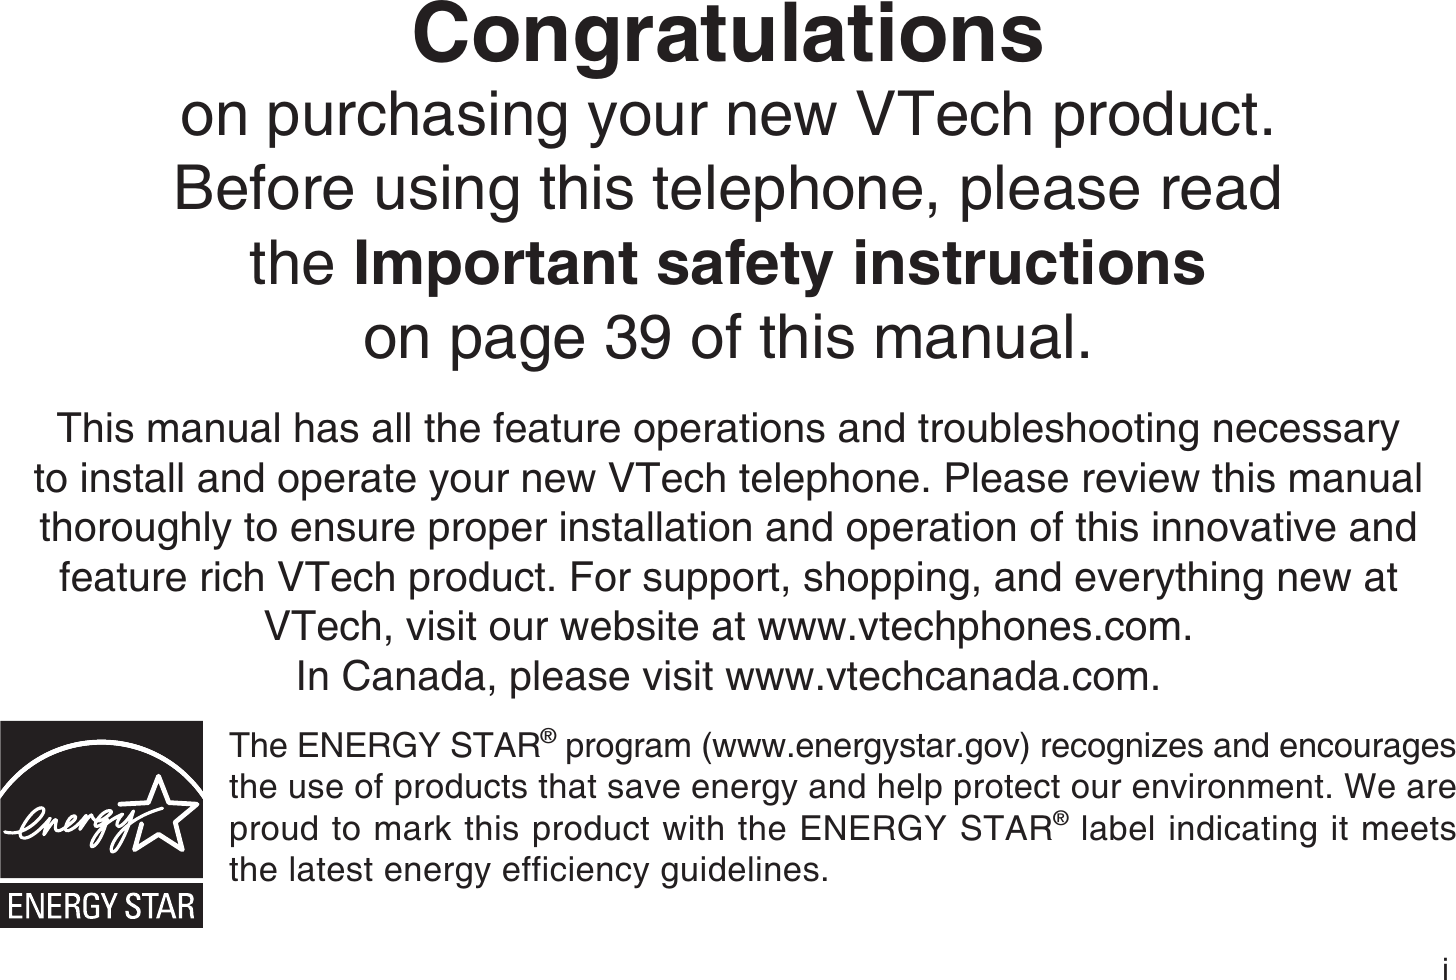 iCongratulationson purchasing your new VTech product.Before using this telephone, please read the Important safety instructionson page 39 of this manual.This manual has all the feature operations and troubleshooting necessary to install and operate your new VTech telephone. Please review this manual thoroughly to ensure proper installation and operation of this innovative and feature rich VTech product. For support, shopping, and everything new at VTech, visit our website at www.vtechphones.com.In Canada, please visit www.vtechcanada.com.The ENERGY STAR® program (www.energystar.gov) recognizes and encourages the use of products that save energy and help protect our environment. We are proud to mark this product with the ENERGY STAR® label indicating it meets the latest energy efficiency guidelines.